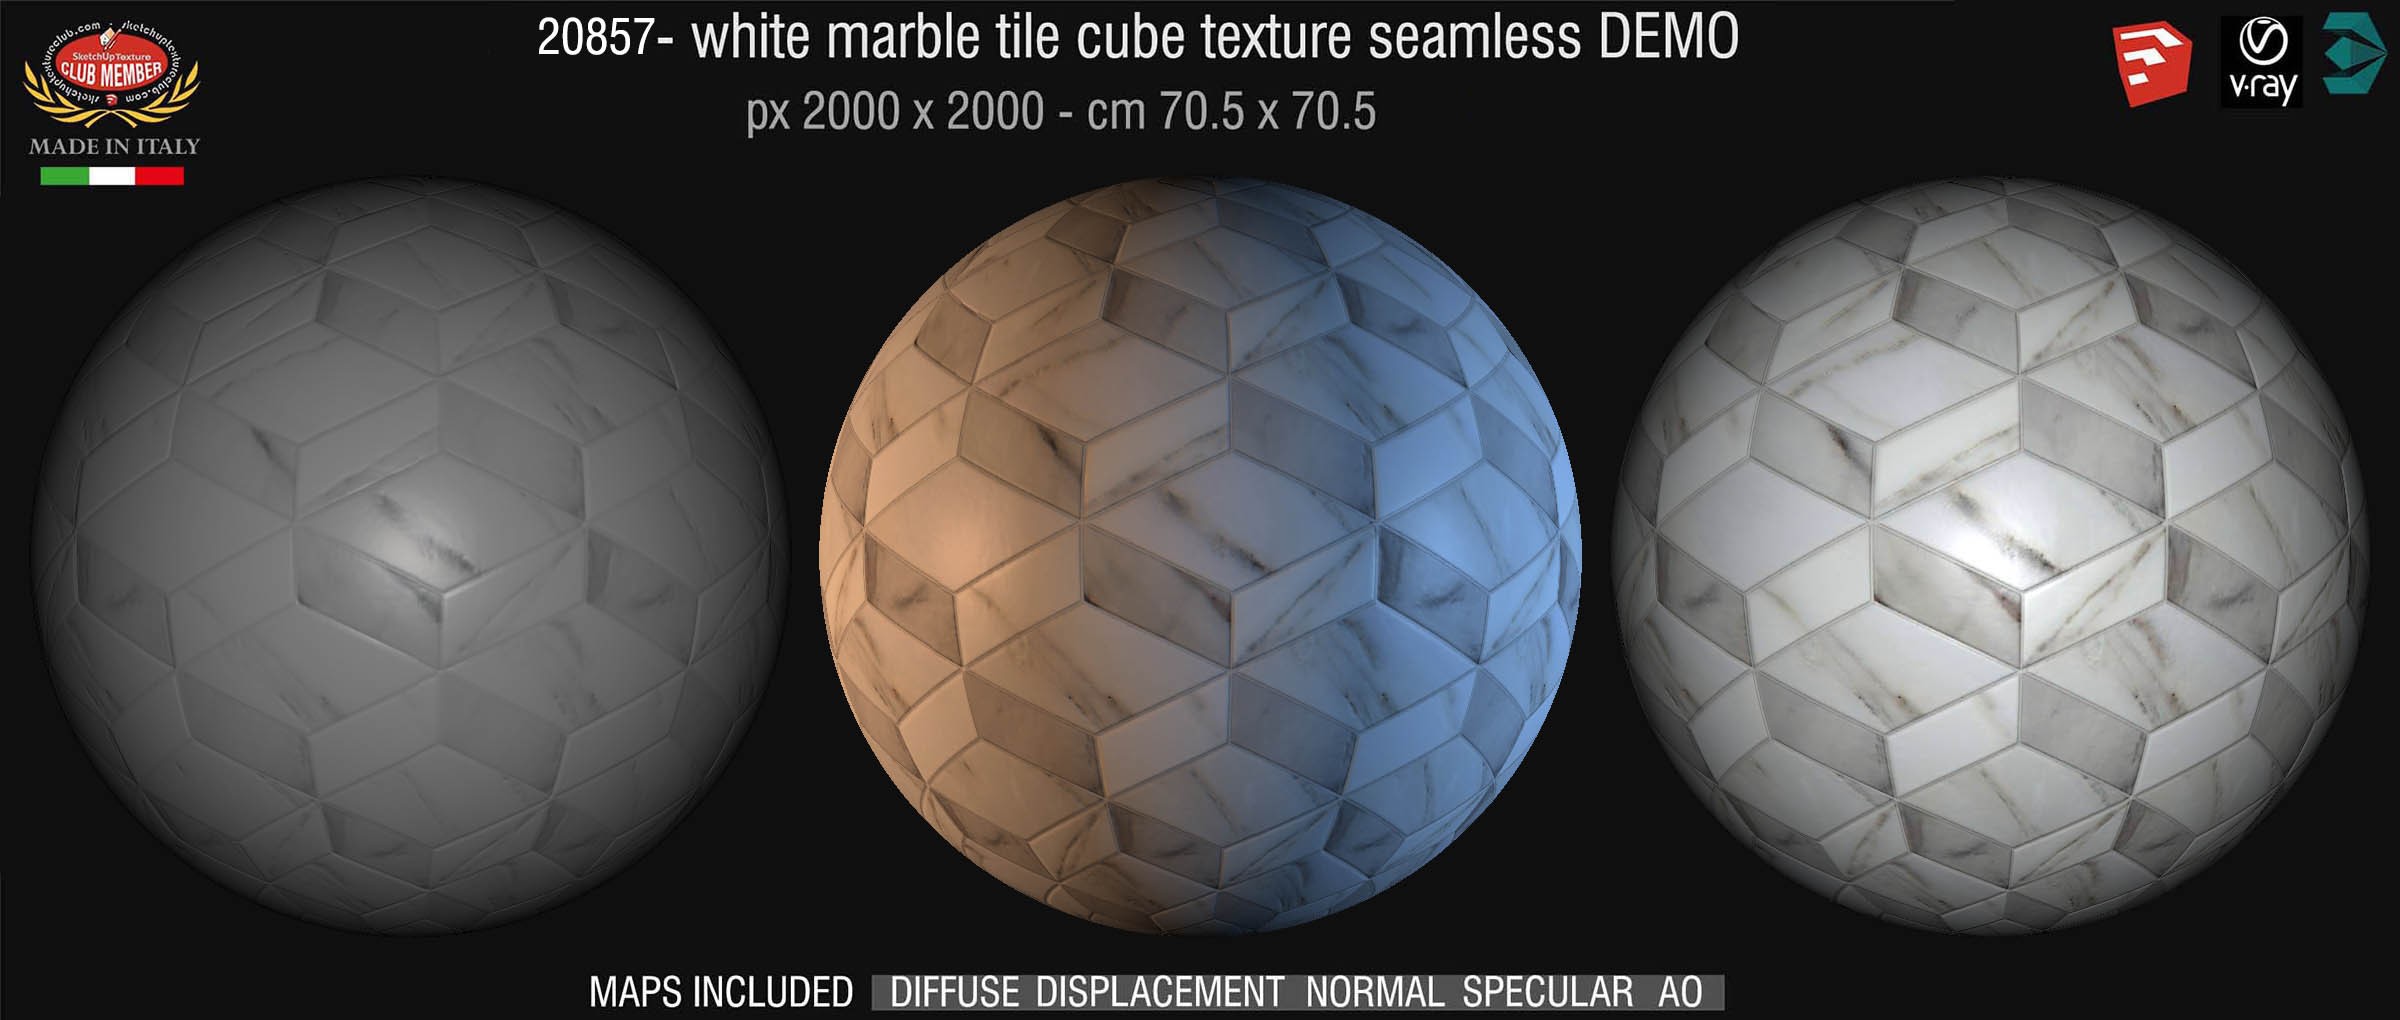 20857 White marble tiles cubes texture seamless and maps DEMO